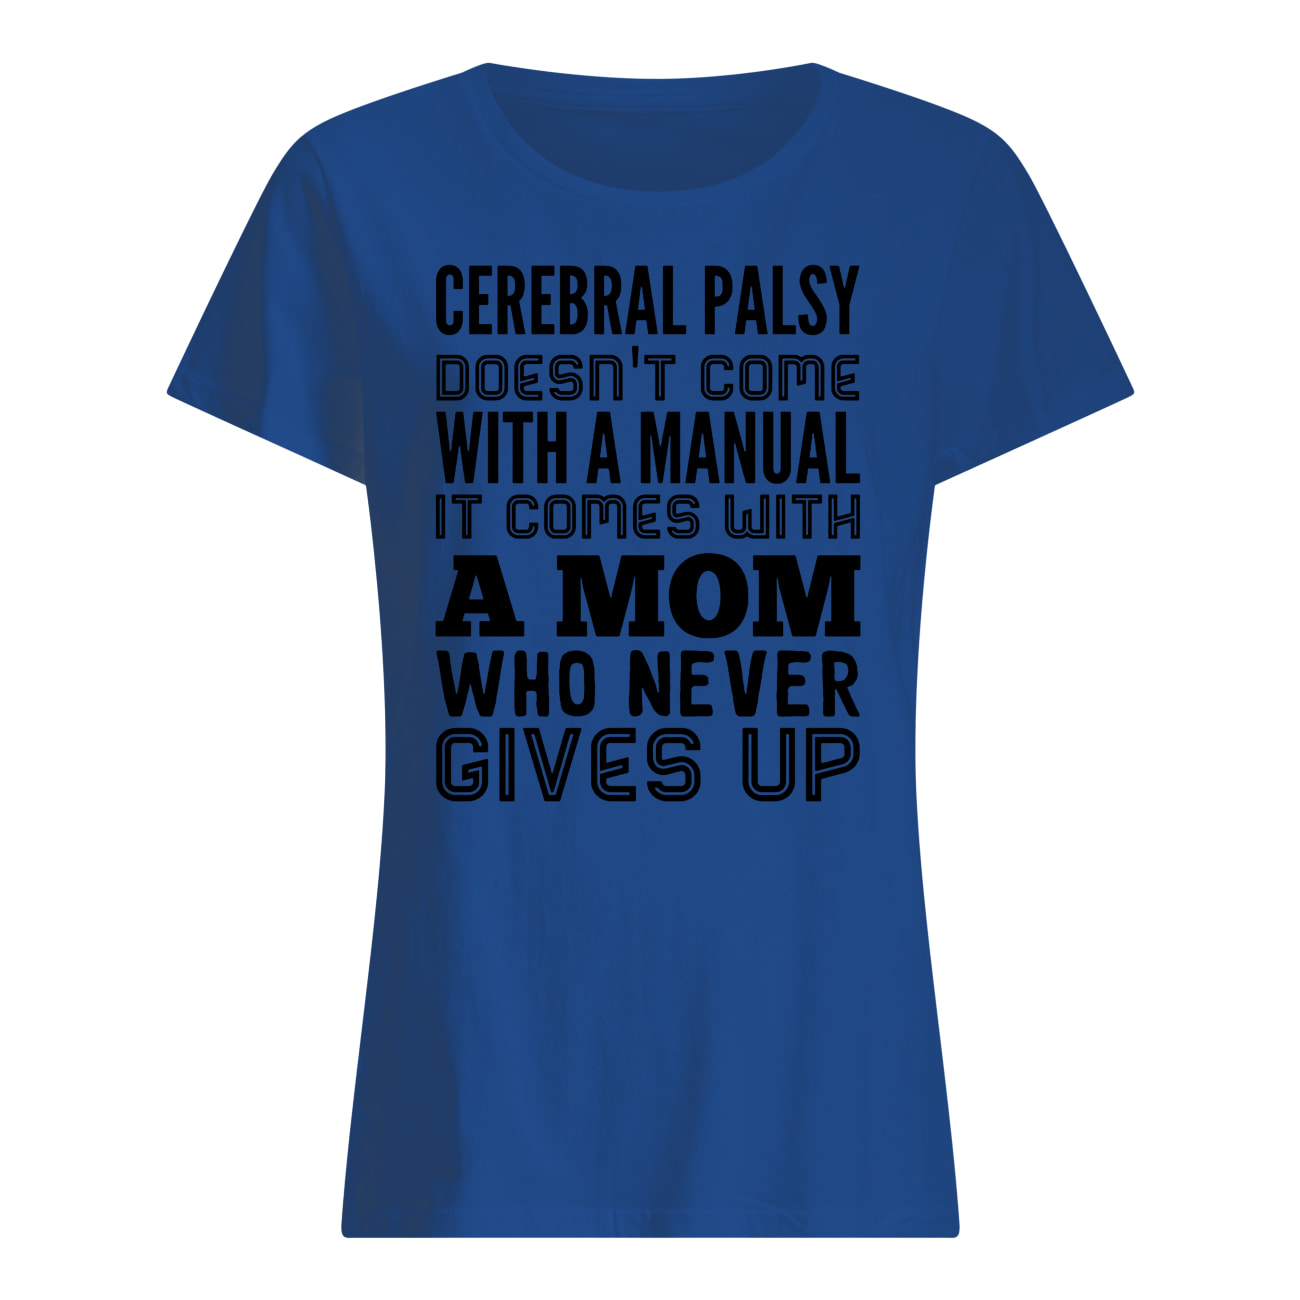 Cerebral palsy doesn't come with a manual it comes with a mom womens shirt